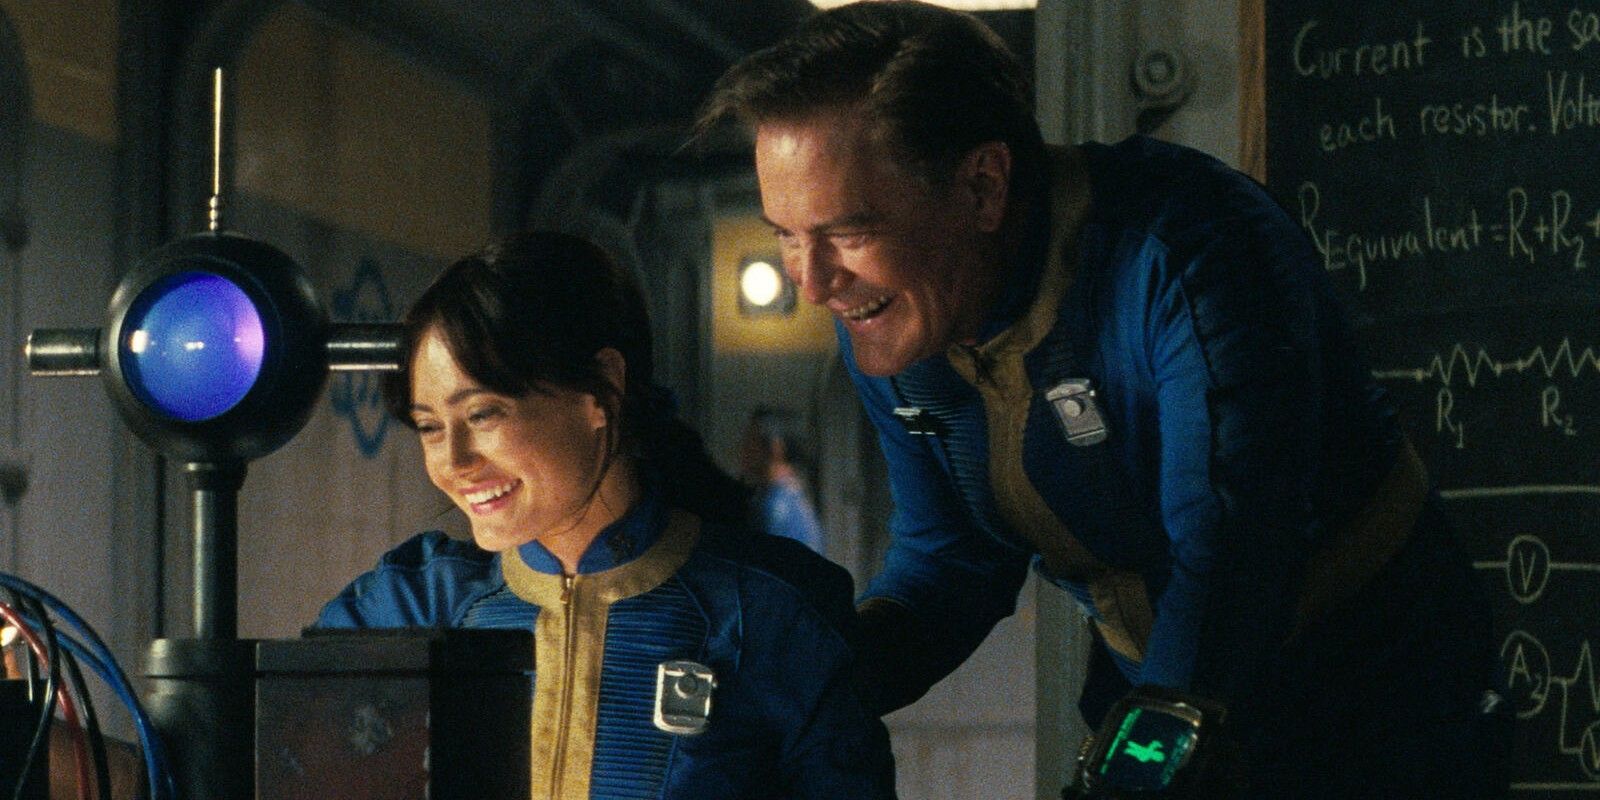 Lucy and Hank grinning down at something together, with Hank standing behind Lucy, in Fallout season 1